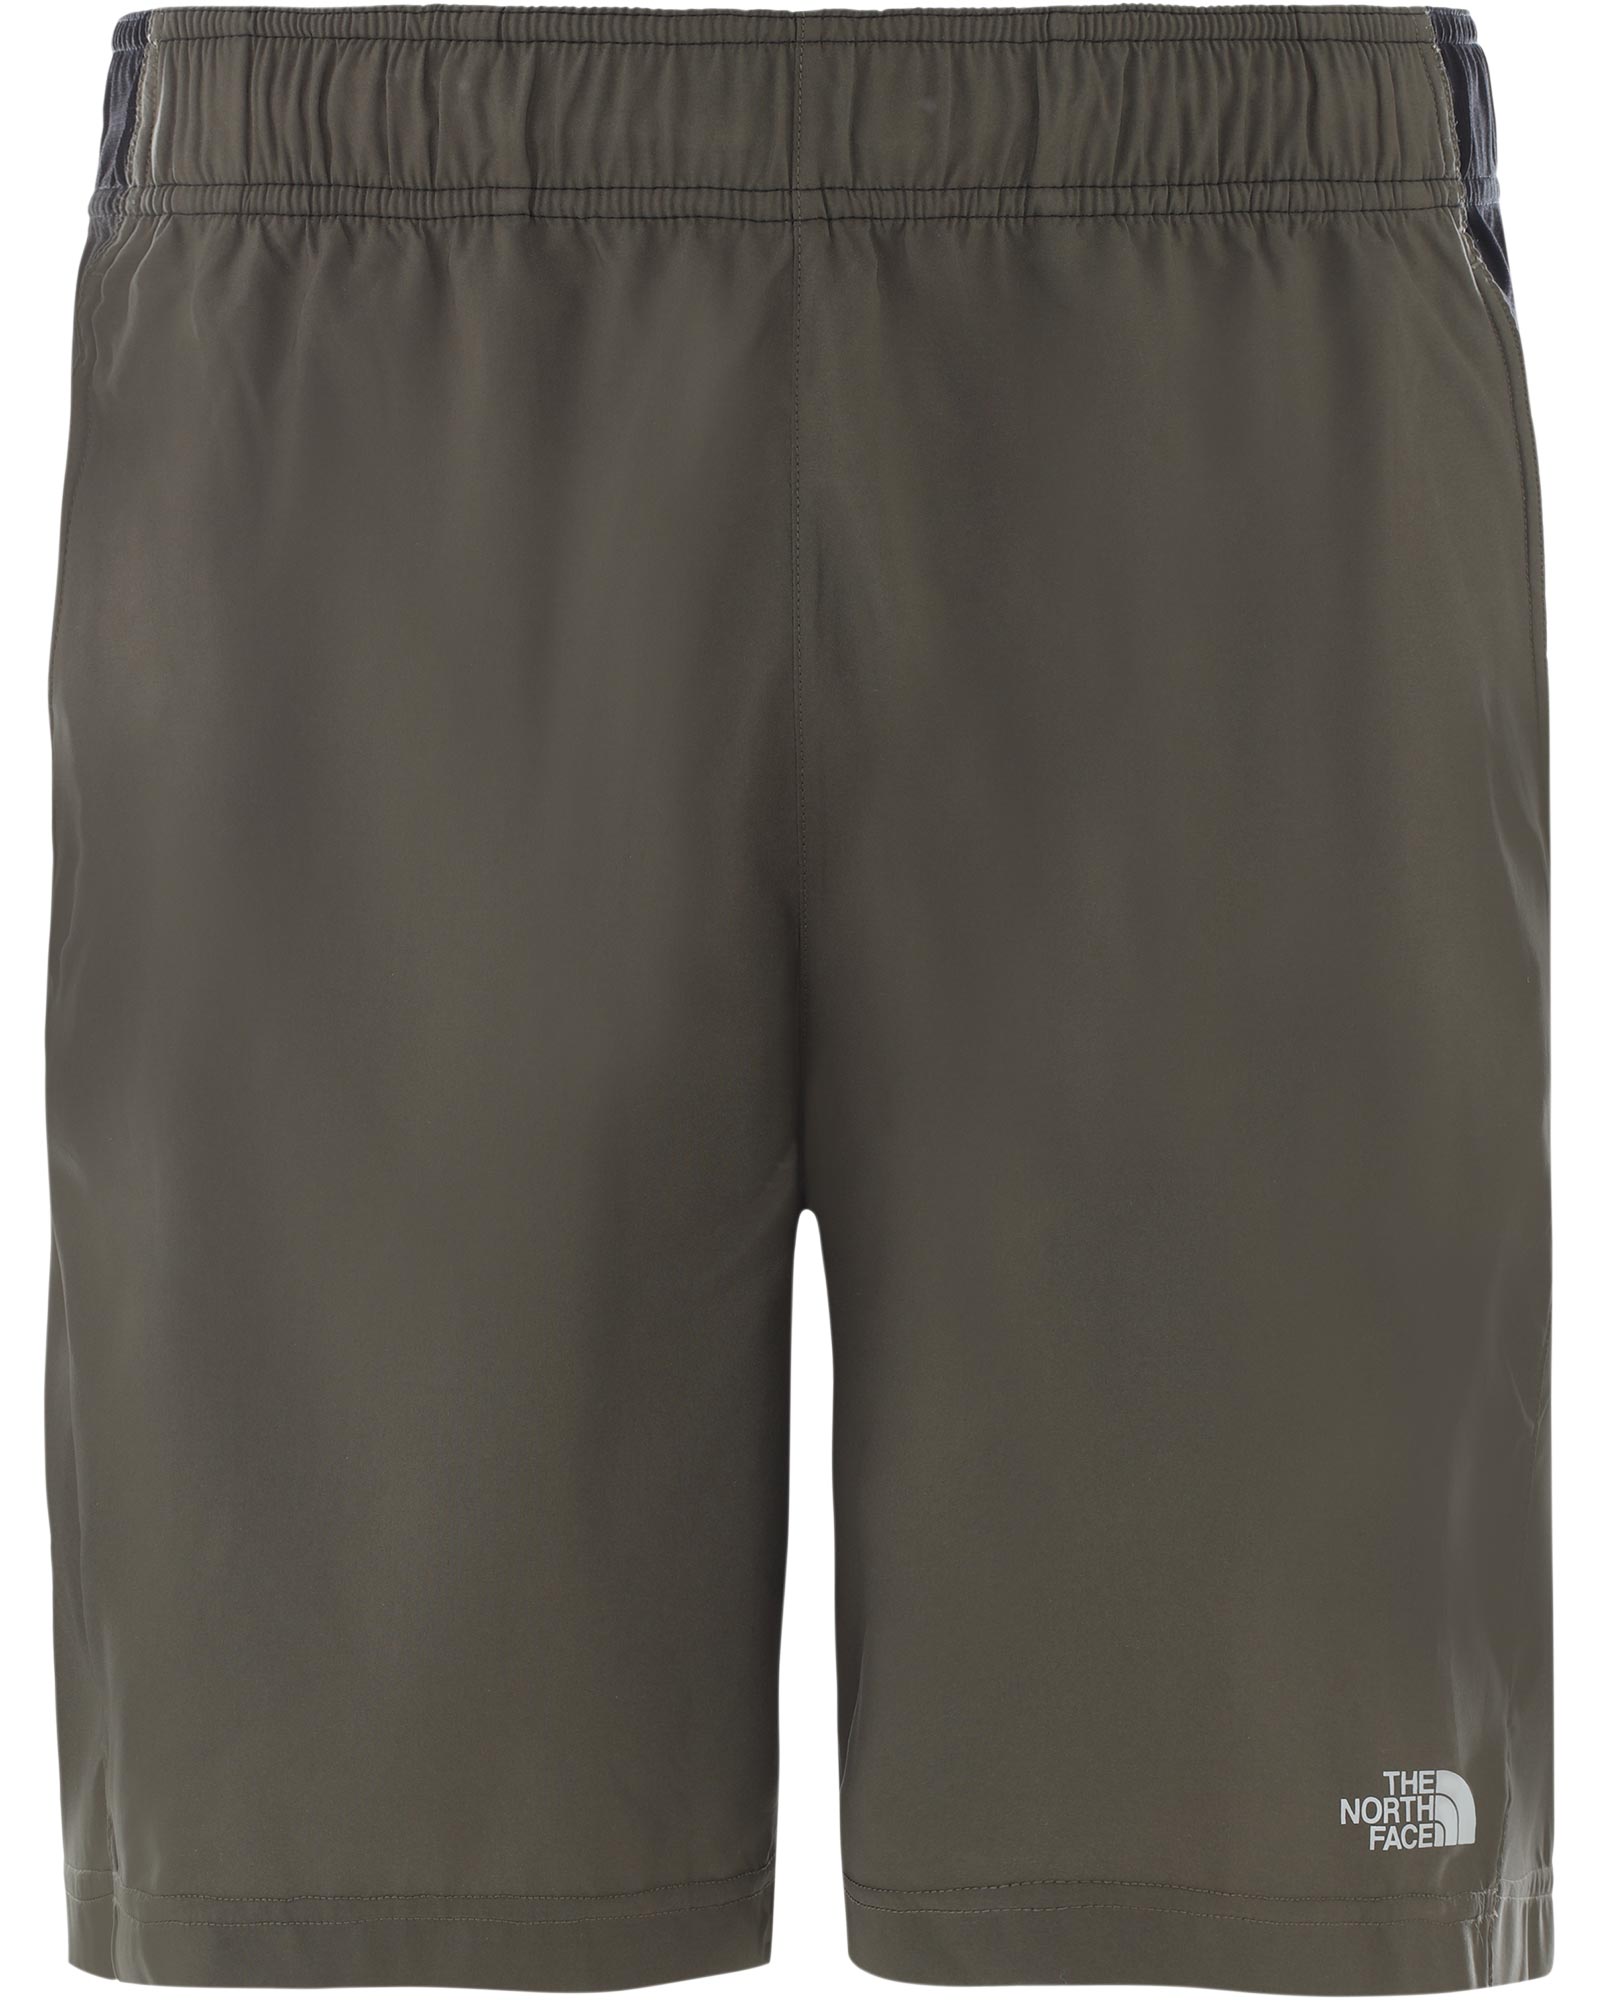 The North Face 24/7 Men’s Shorts - New Taupe Green S